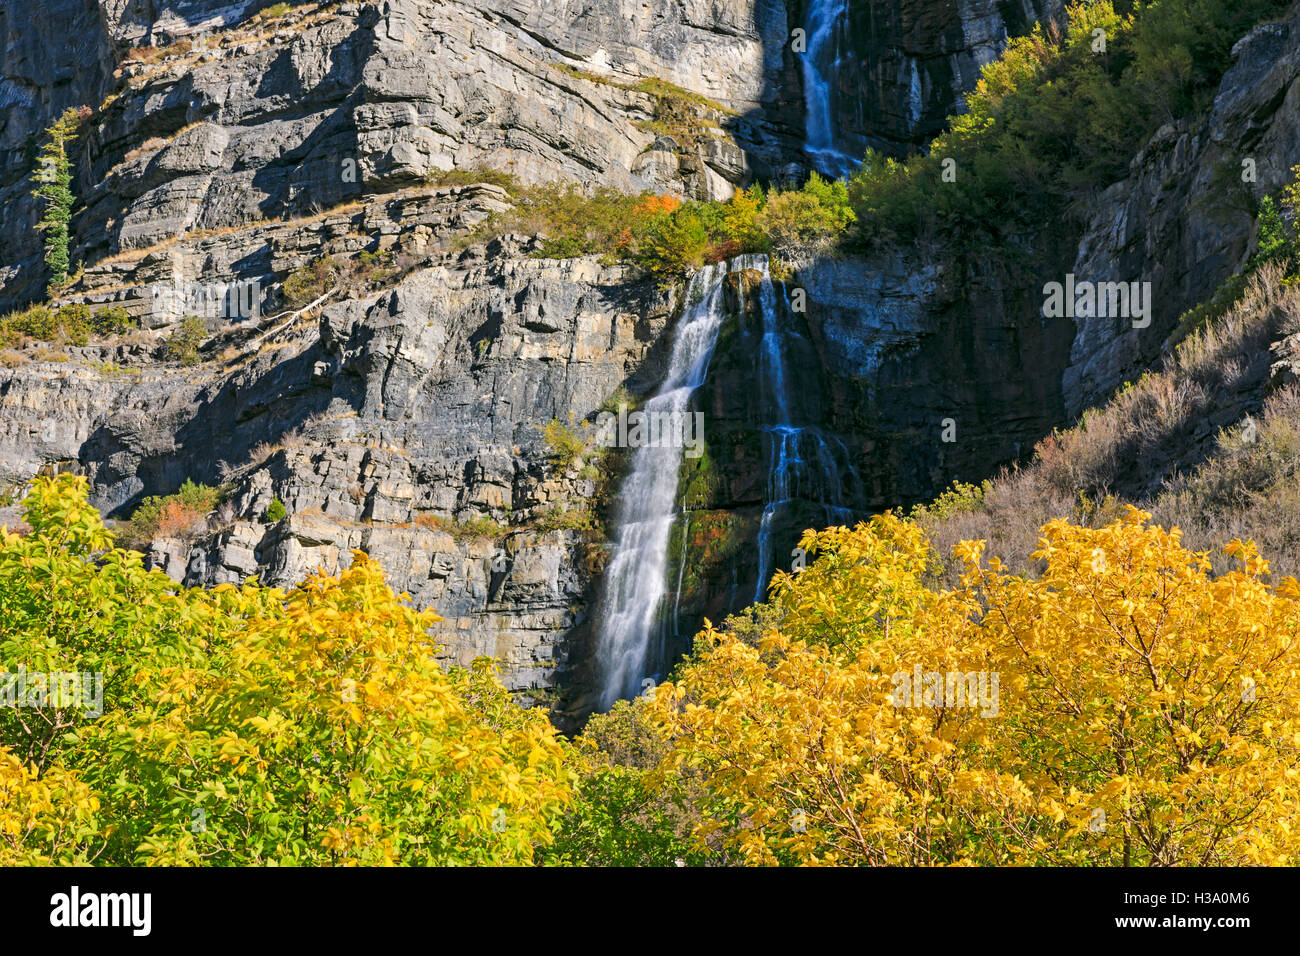 This is a view of the fall colors at Bridal Veil Falls in Provo Canyon, Utah, USA Stock Photo